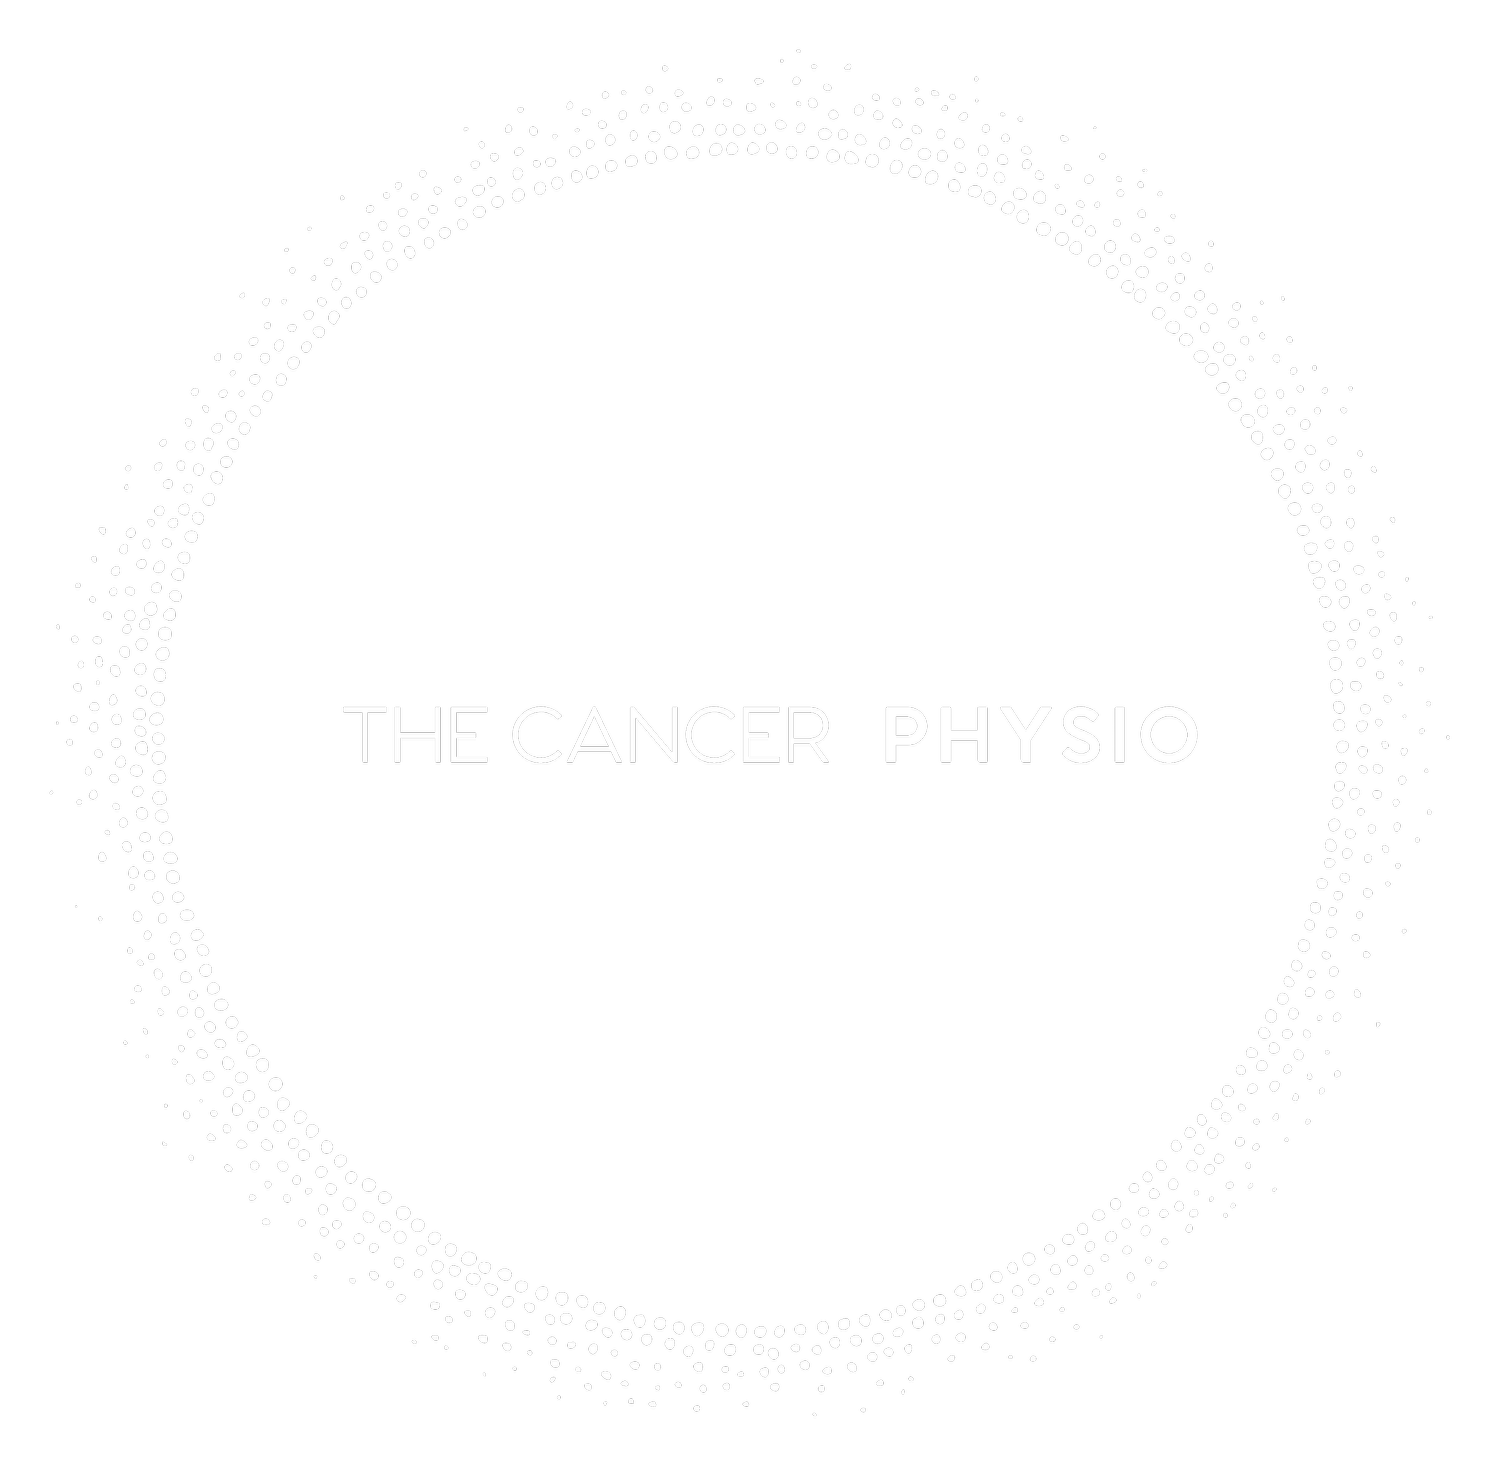 The Cancer Physio